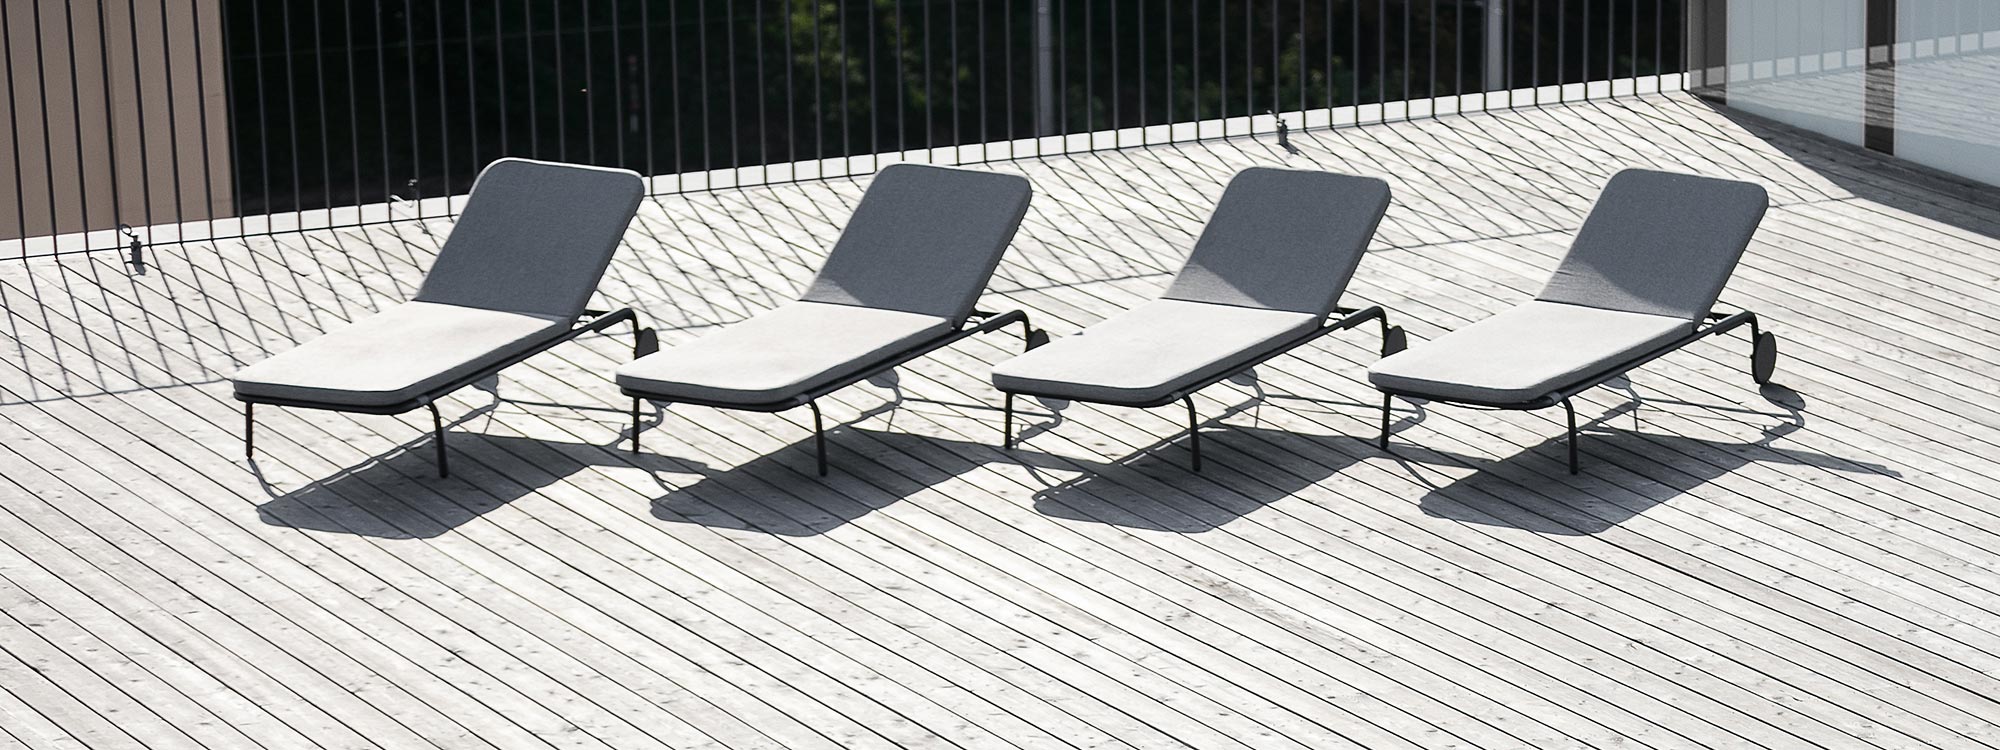 Starling modern sunbed is a stainless steel sun lounger with comfortable sun lounger cushion by Todus modern garden furniture company.